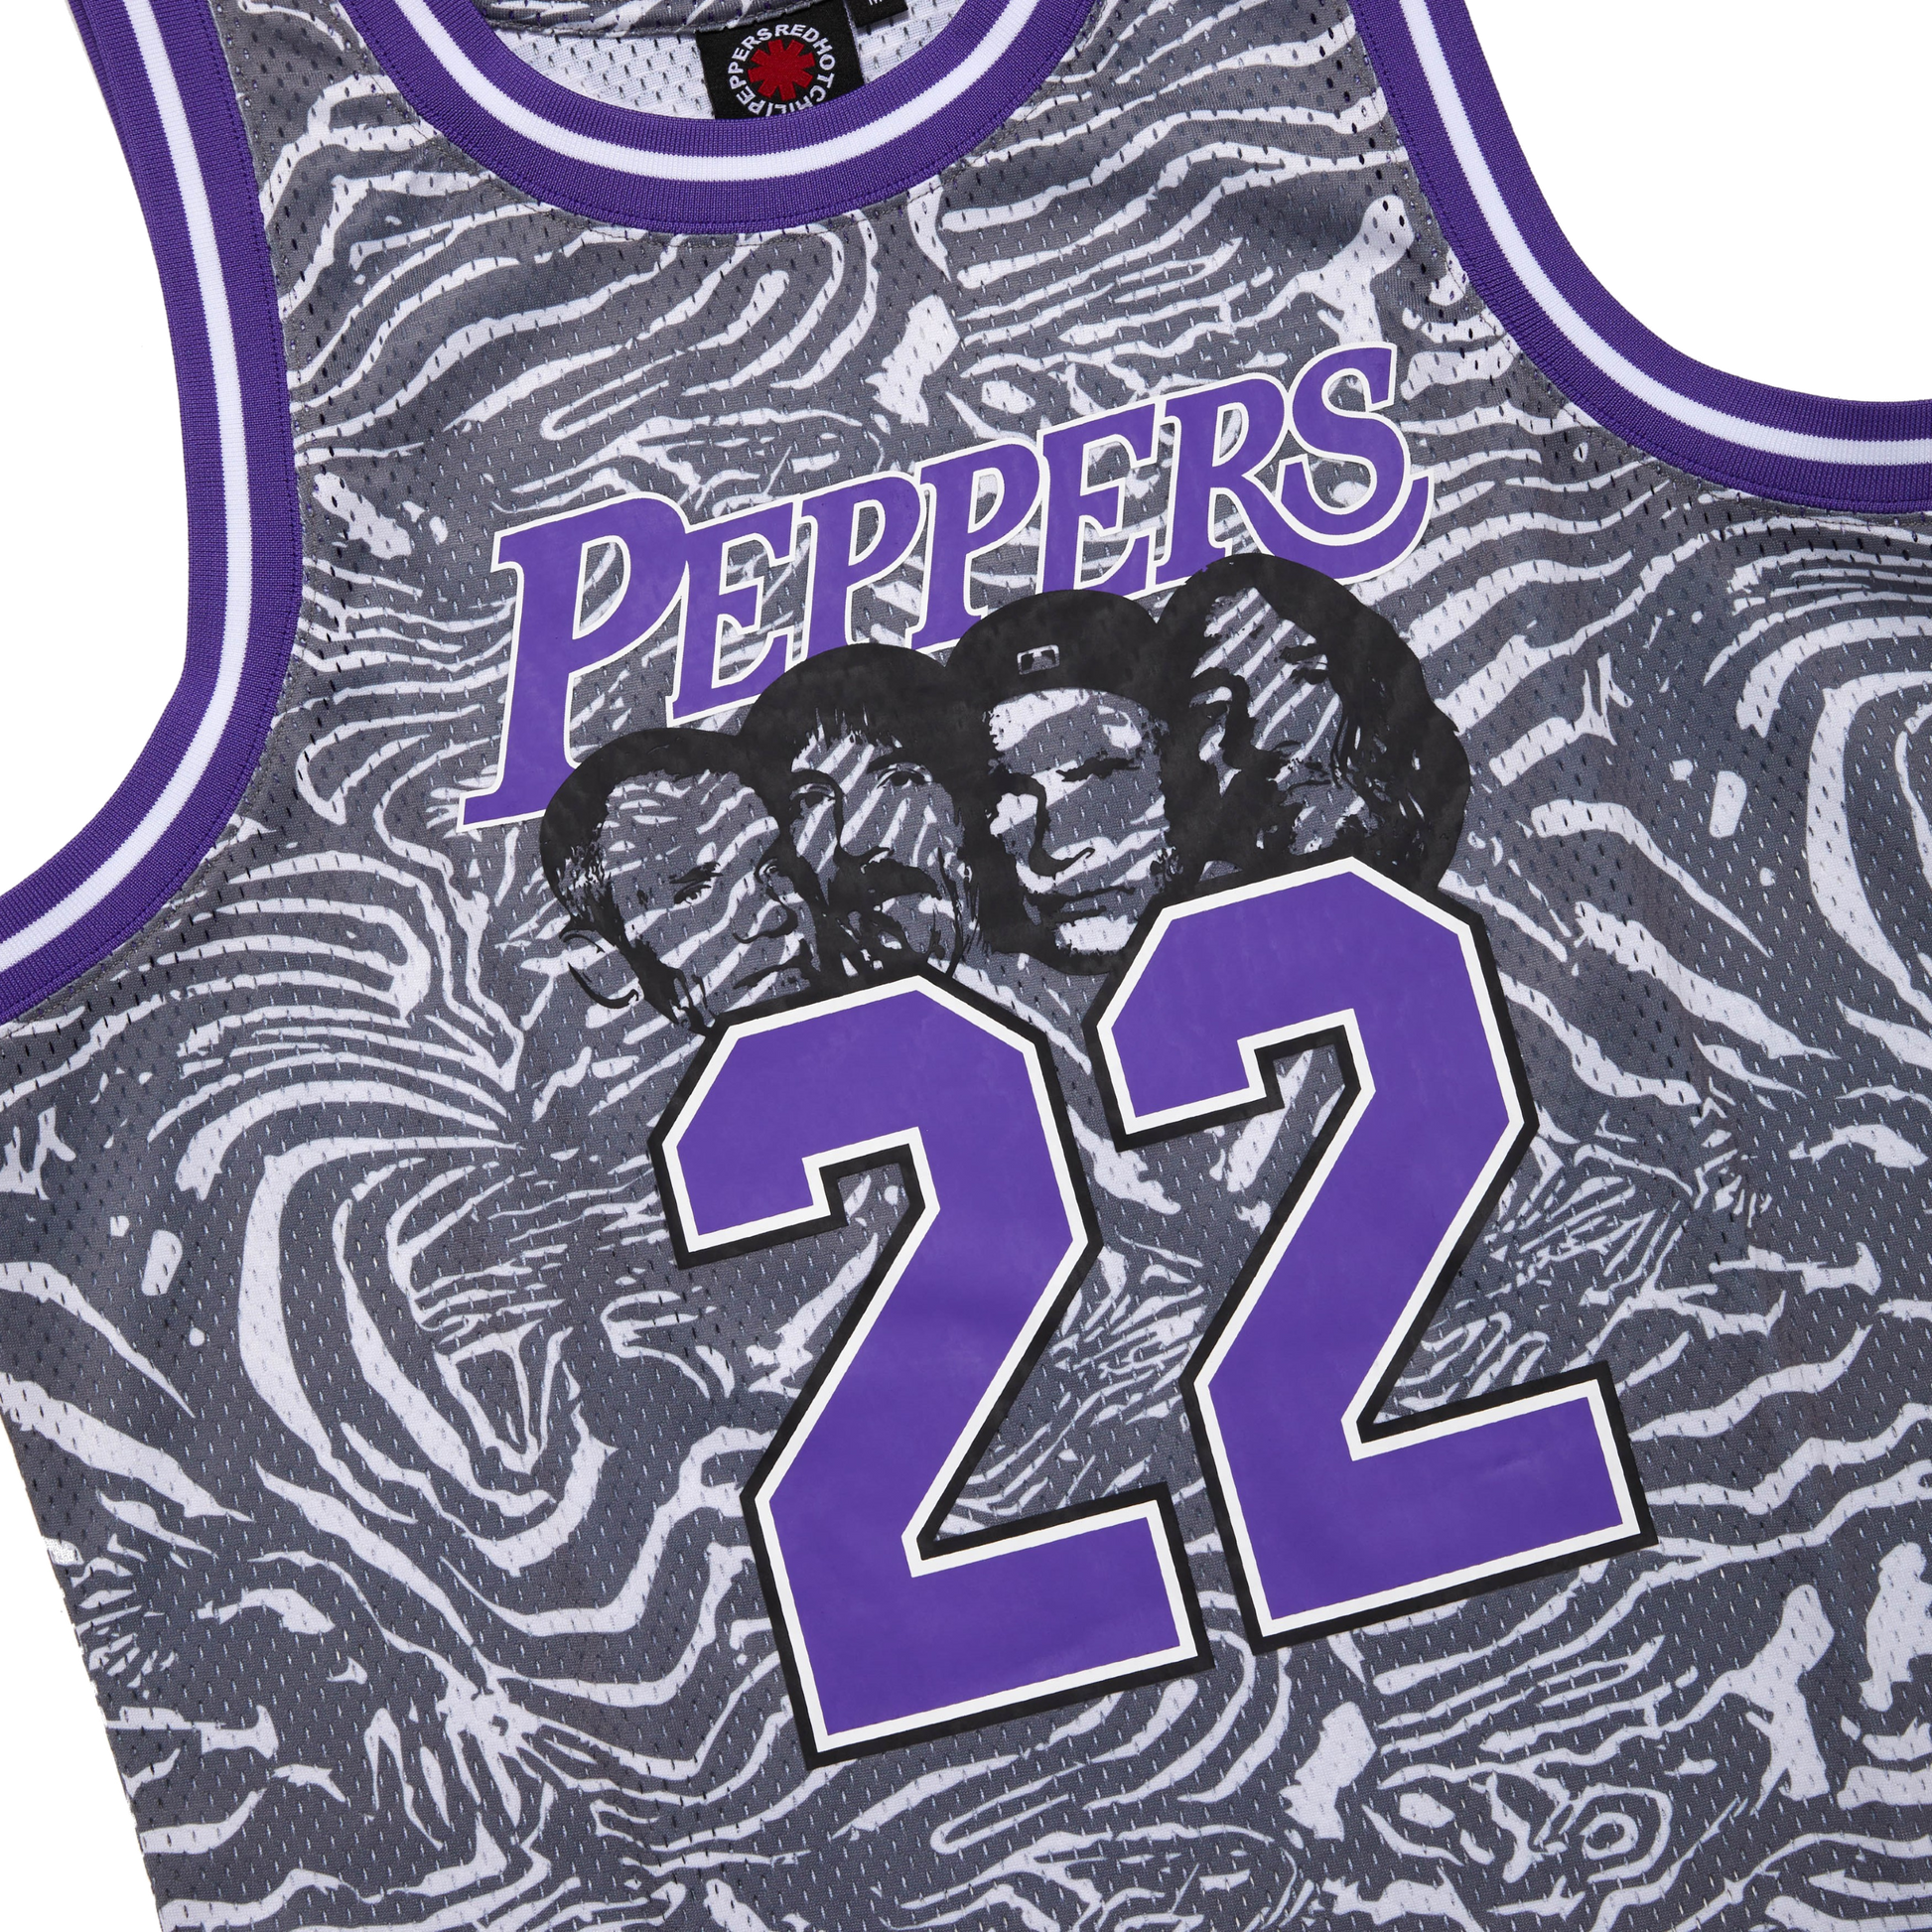 We See You Basketball Jersey – Red Hot Chili Peppers